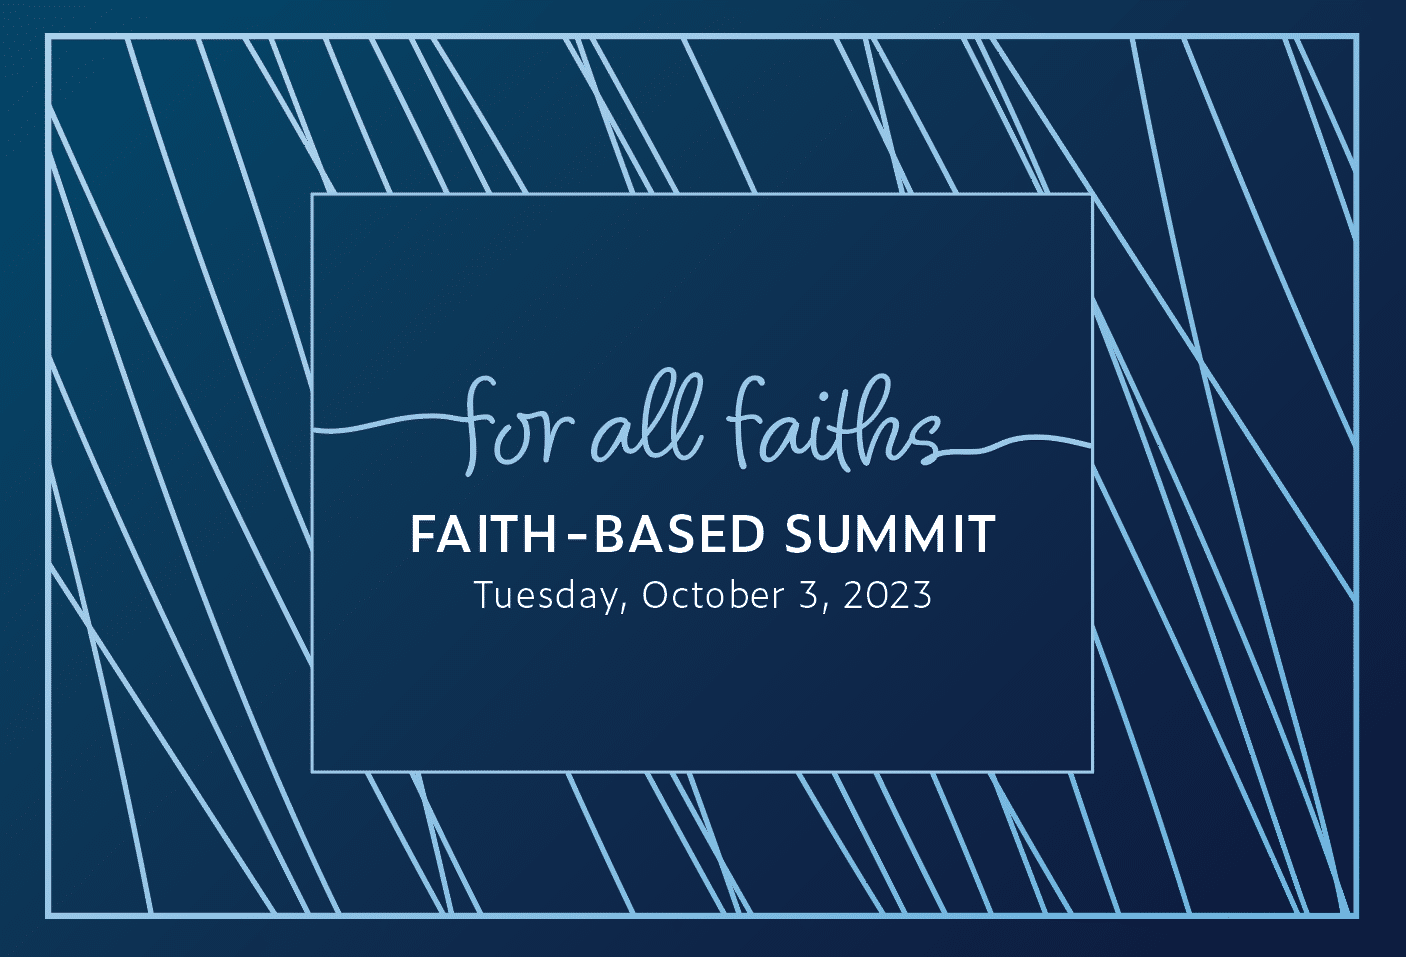 Faith-Based Summit For All Faiths event image cover from Tuesday, October 3, 2023